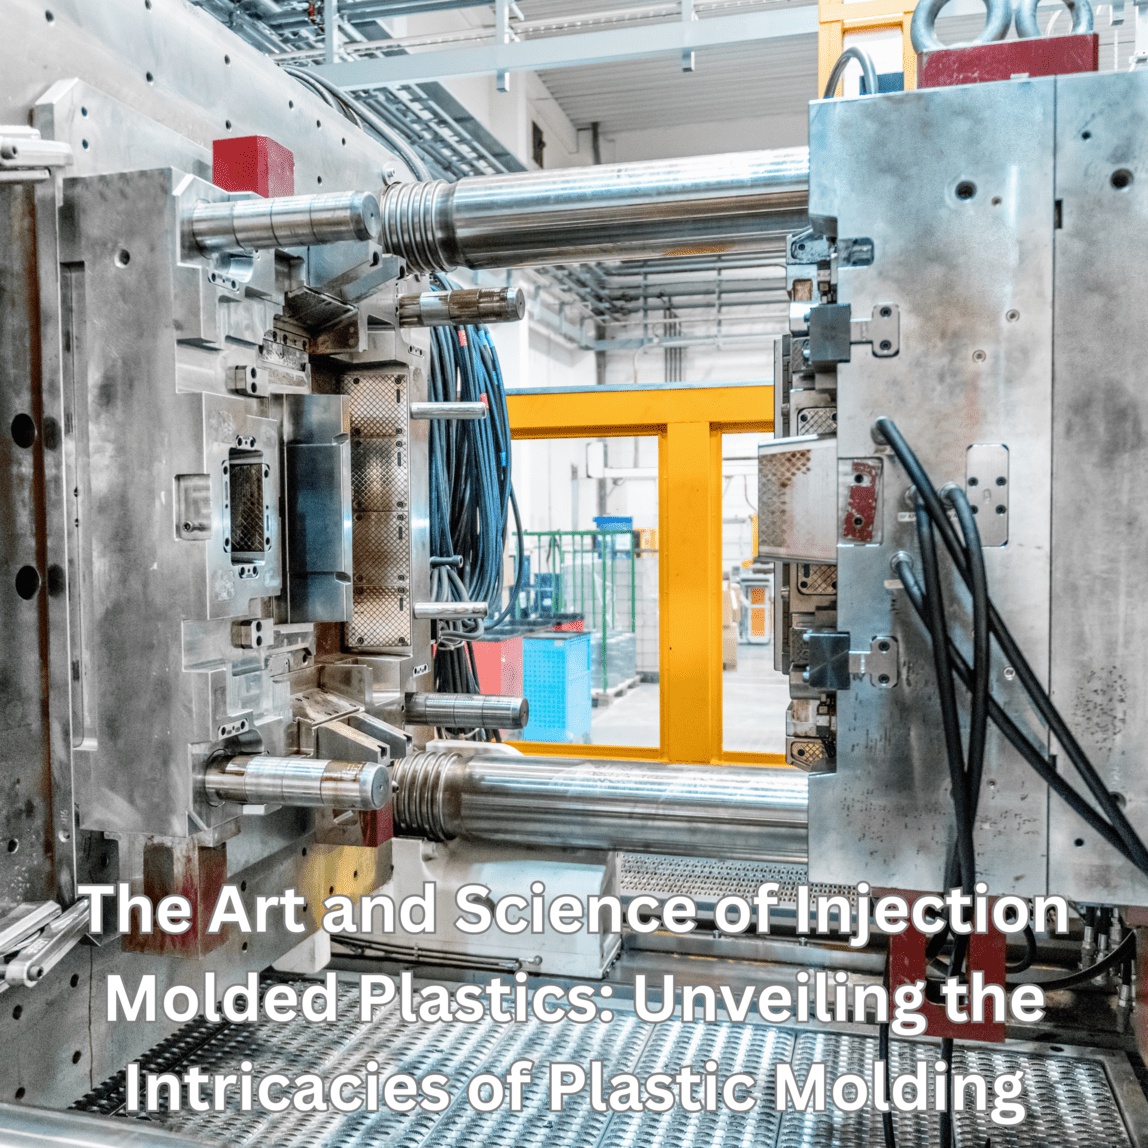 The Art and Science of Injection Molded Plastics: Unveiling the Intricacies of Plastic Molding